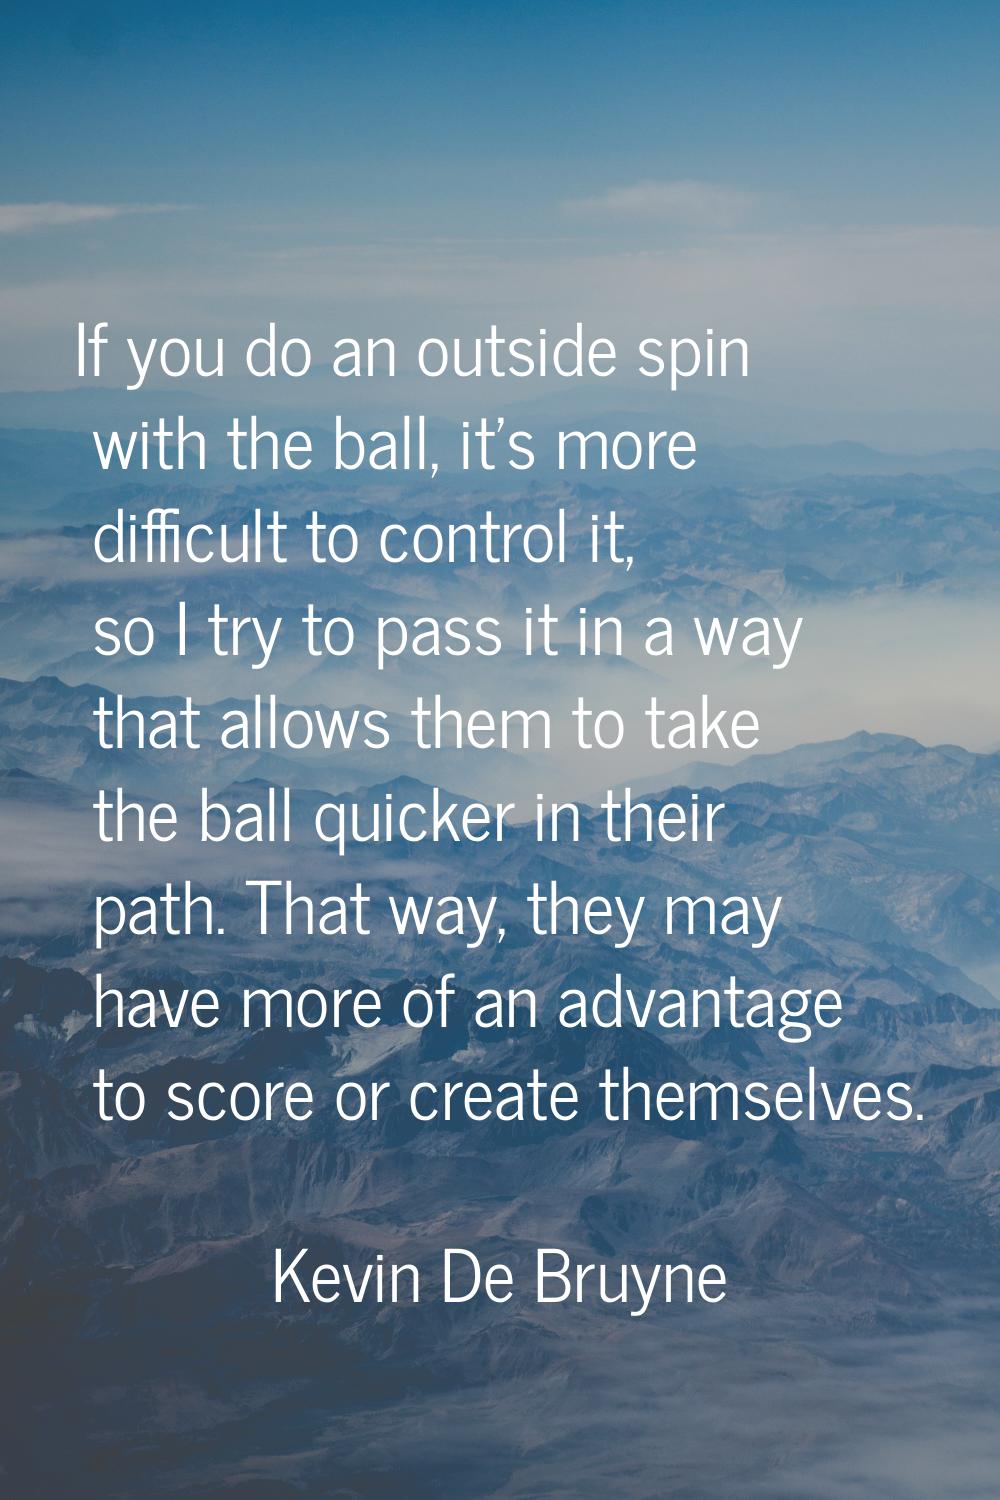 If you do an outside spin with the ball, it's more difficult to control it, so I try to pass it in 